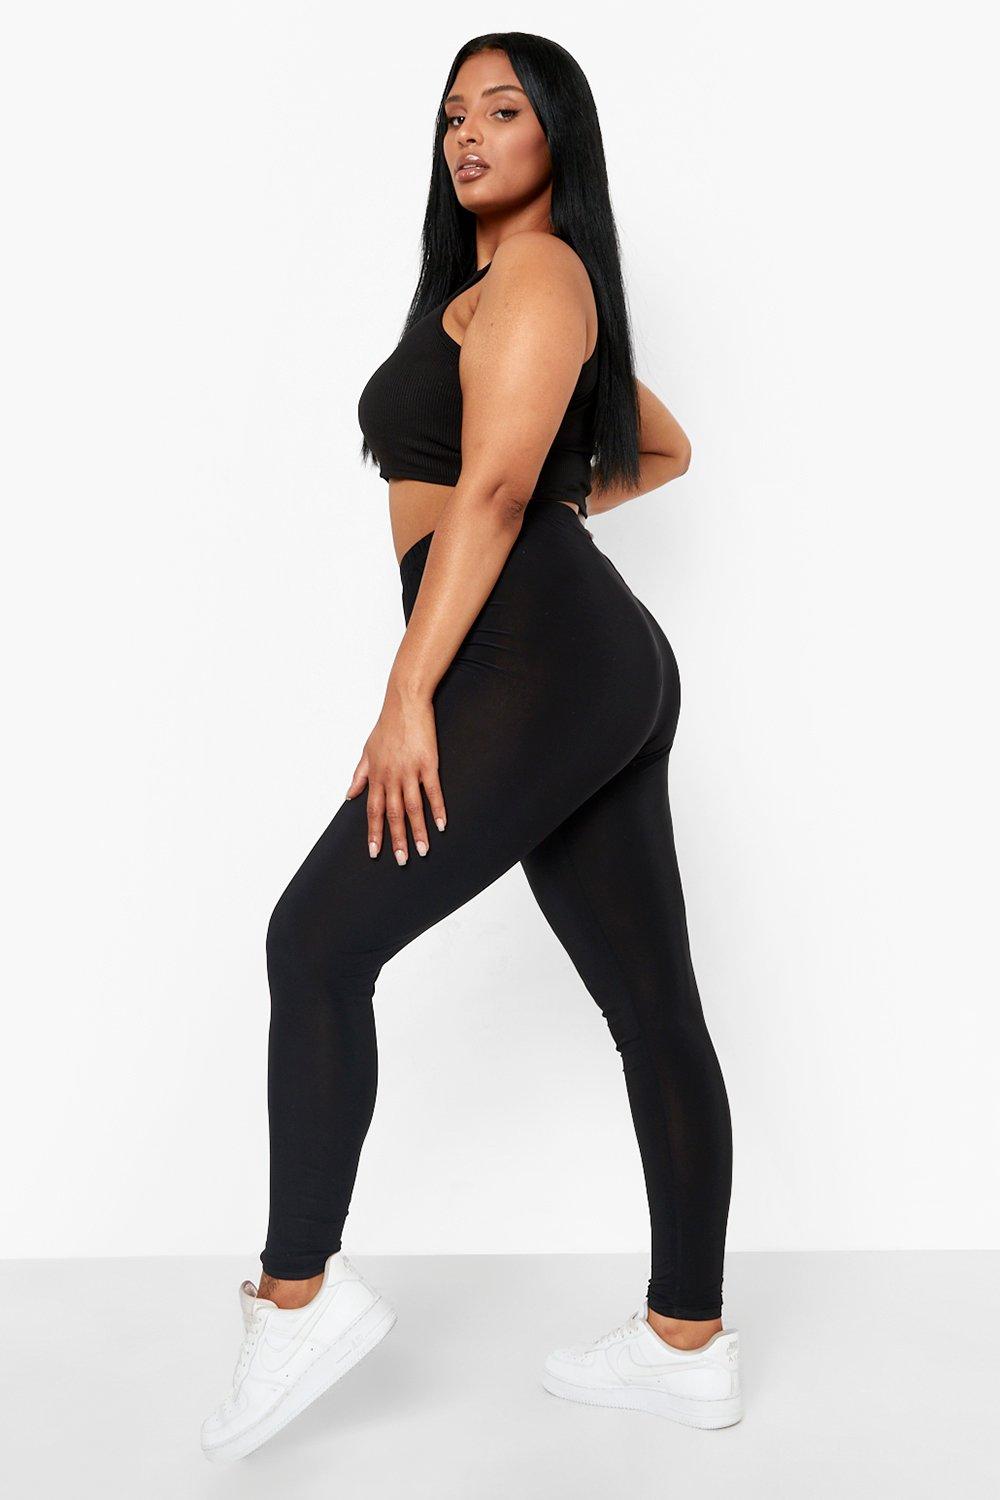 LMB High Waisted Leggings for Women - Black - Plus Size - Workout